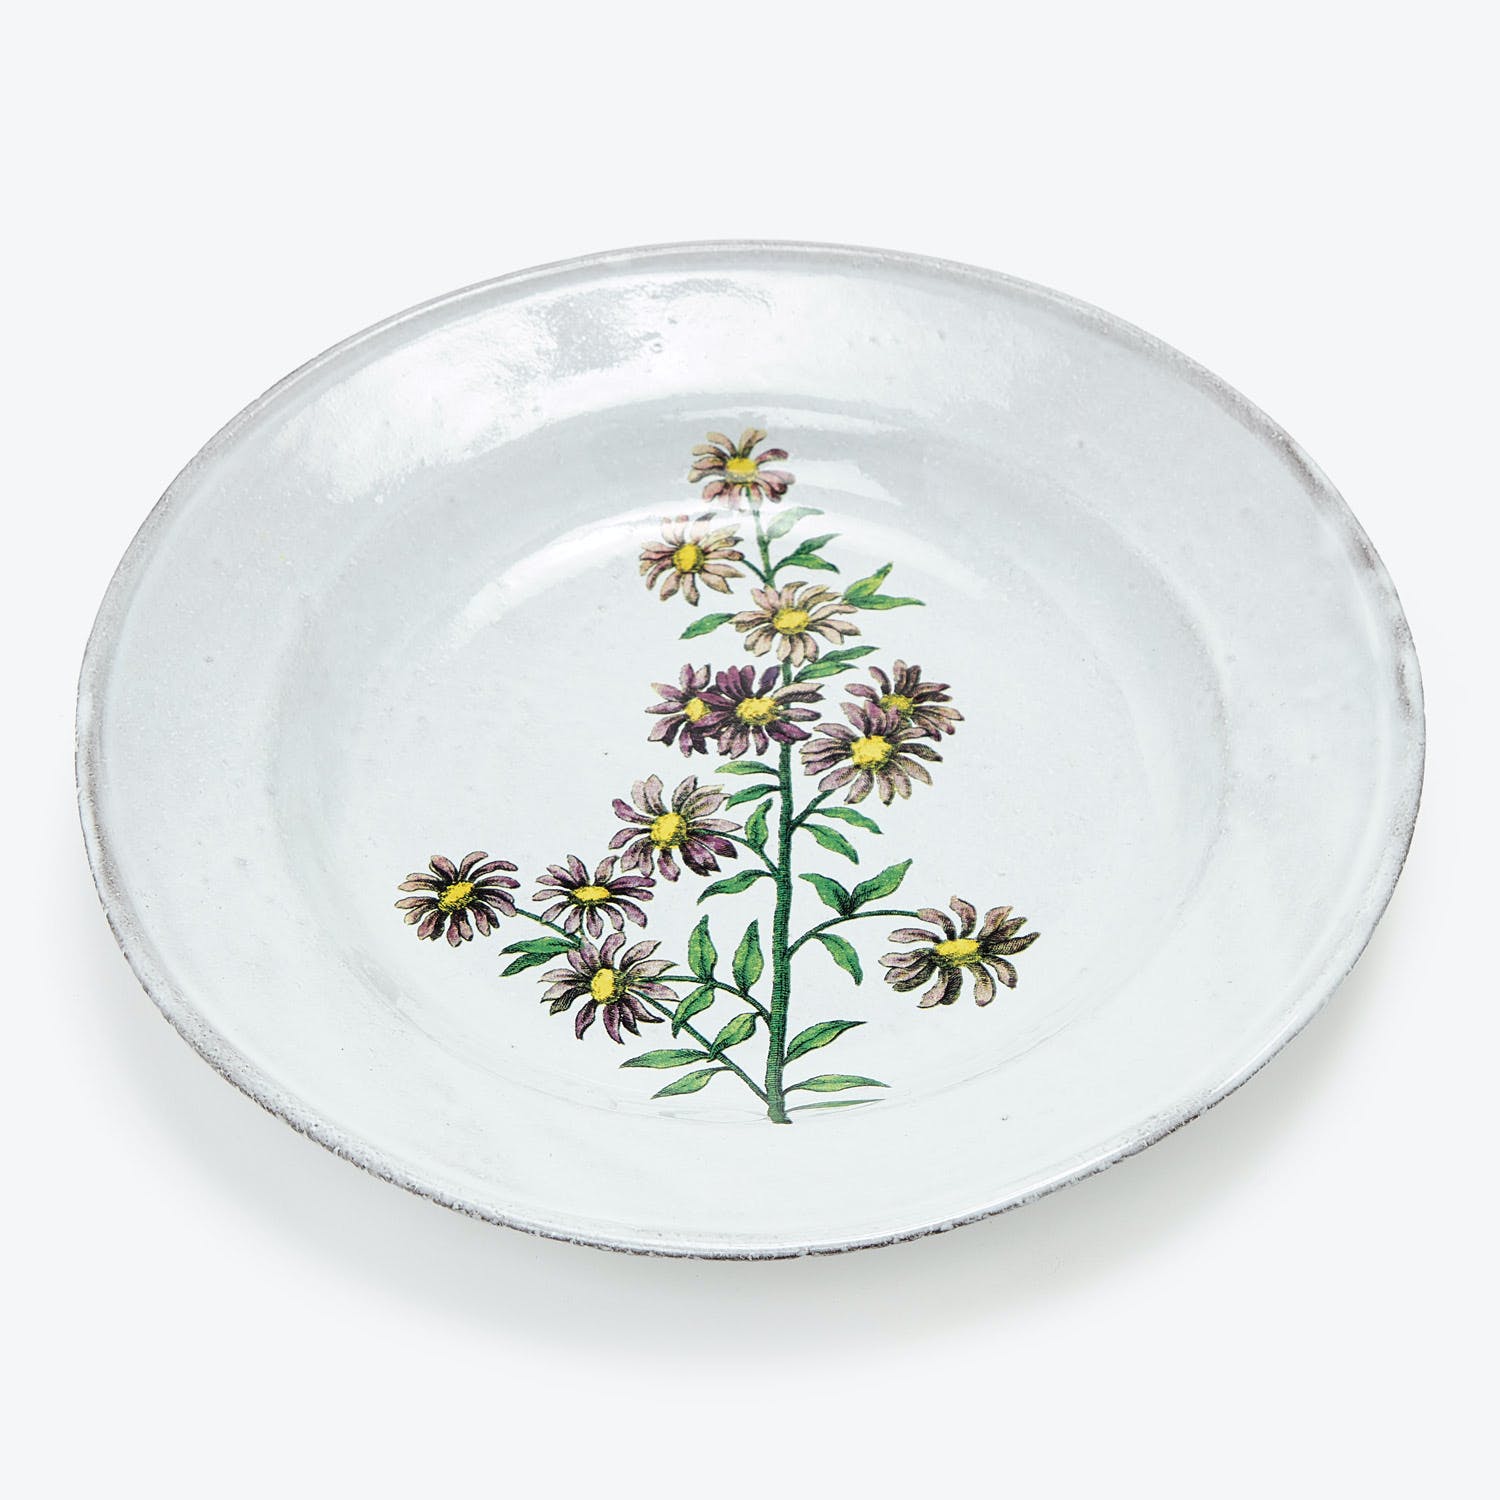 Hand-painted vintage plate with floral design in purple and yellow.